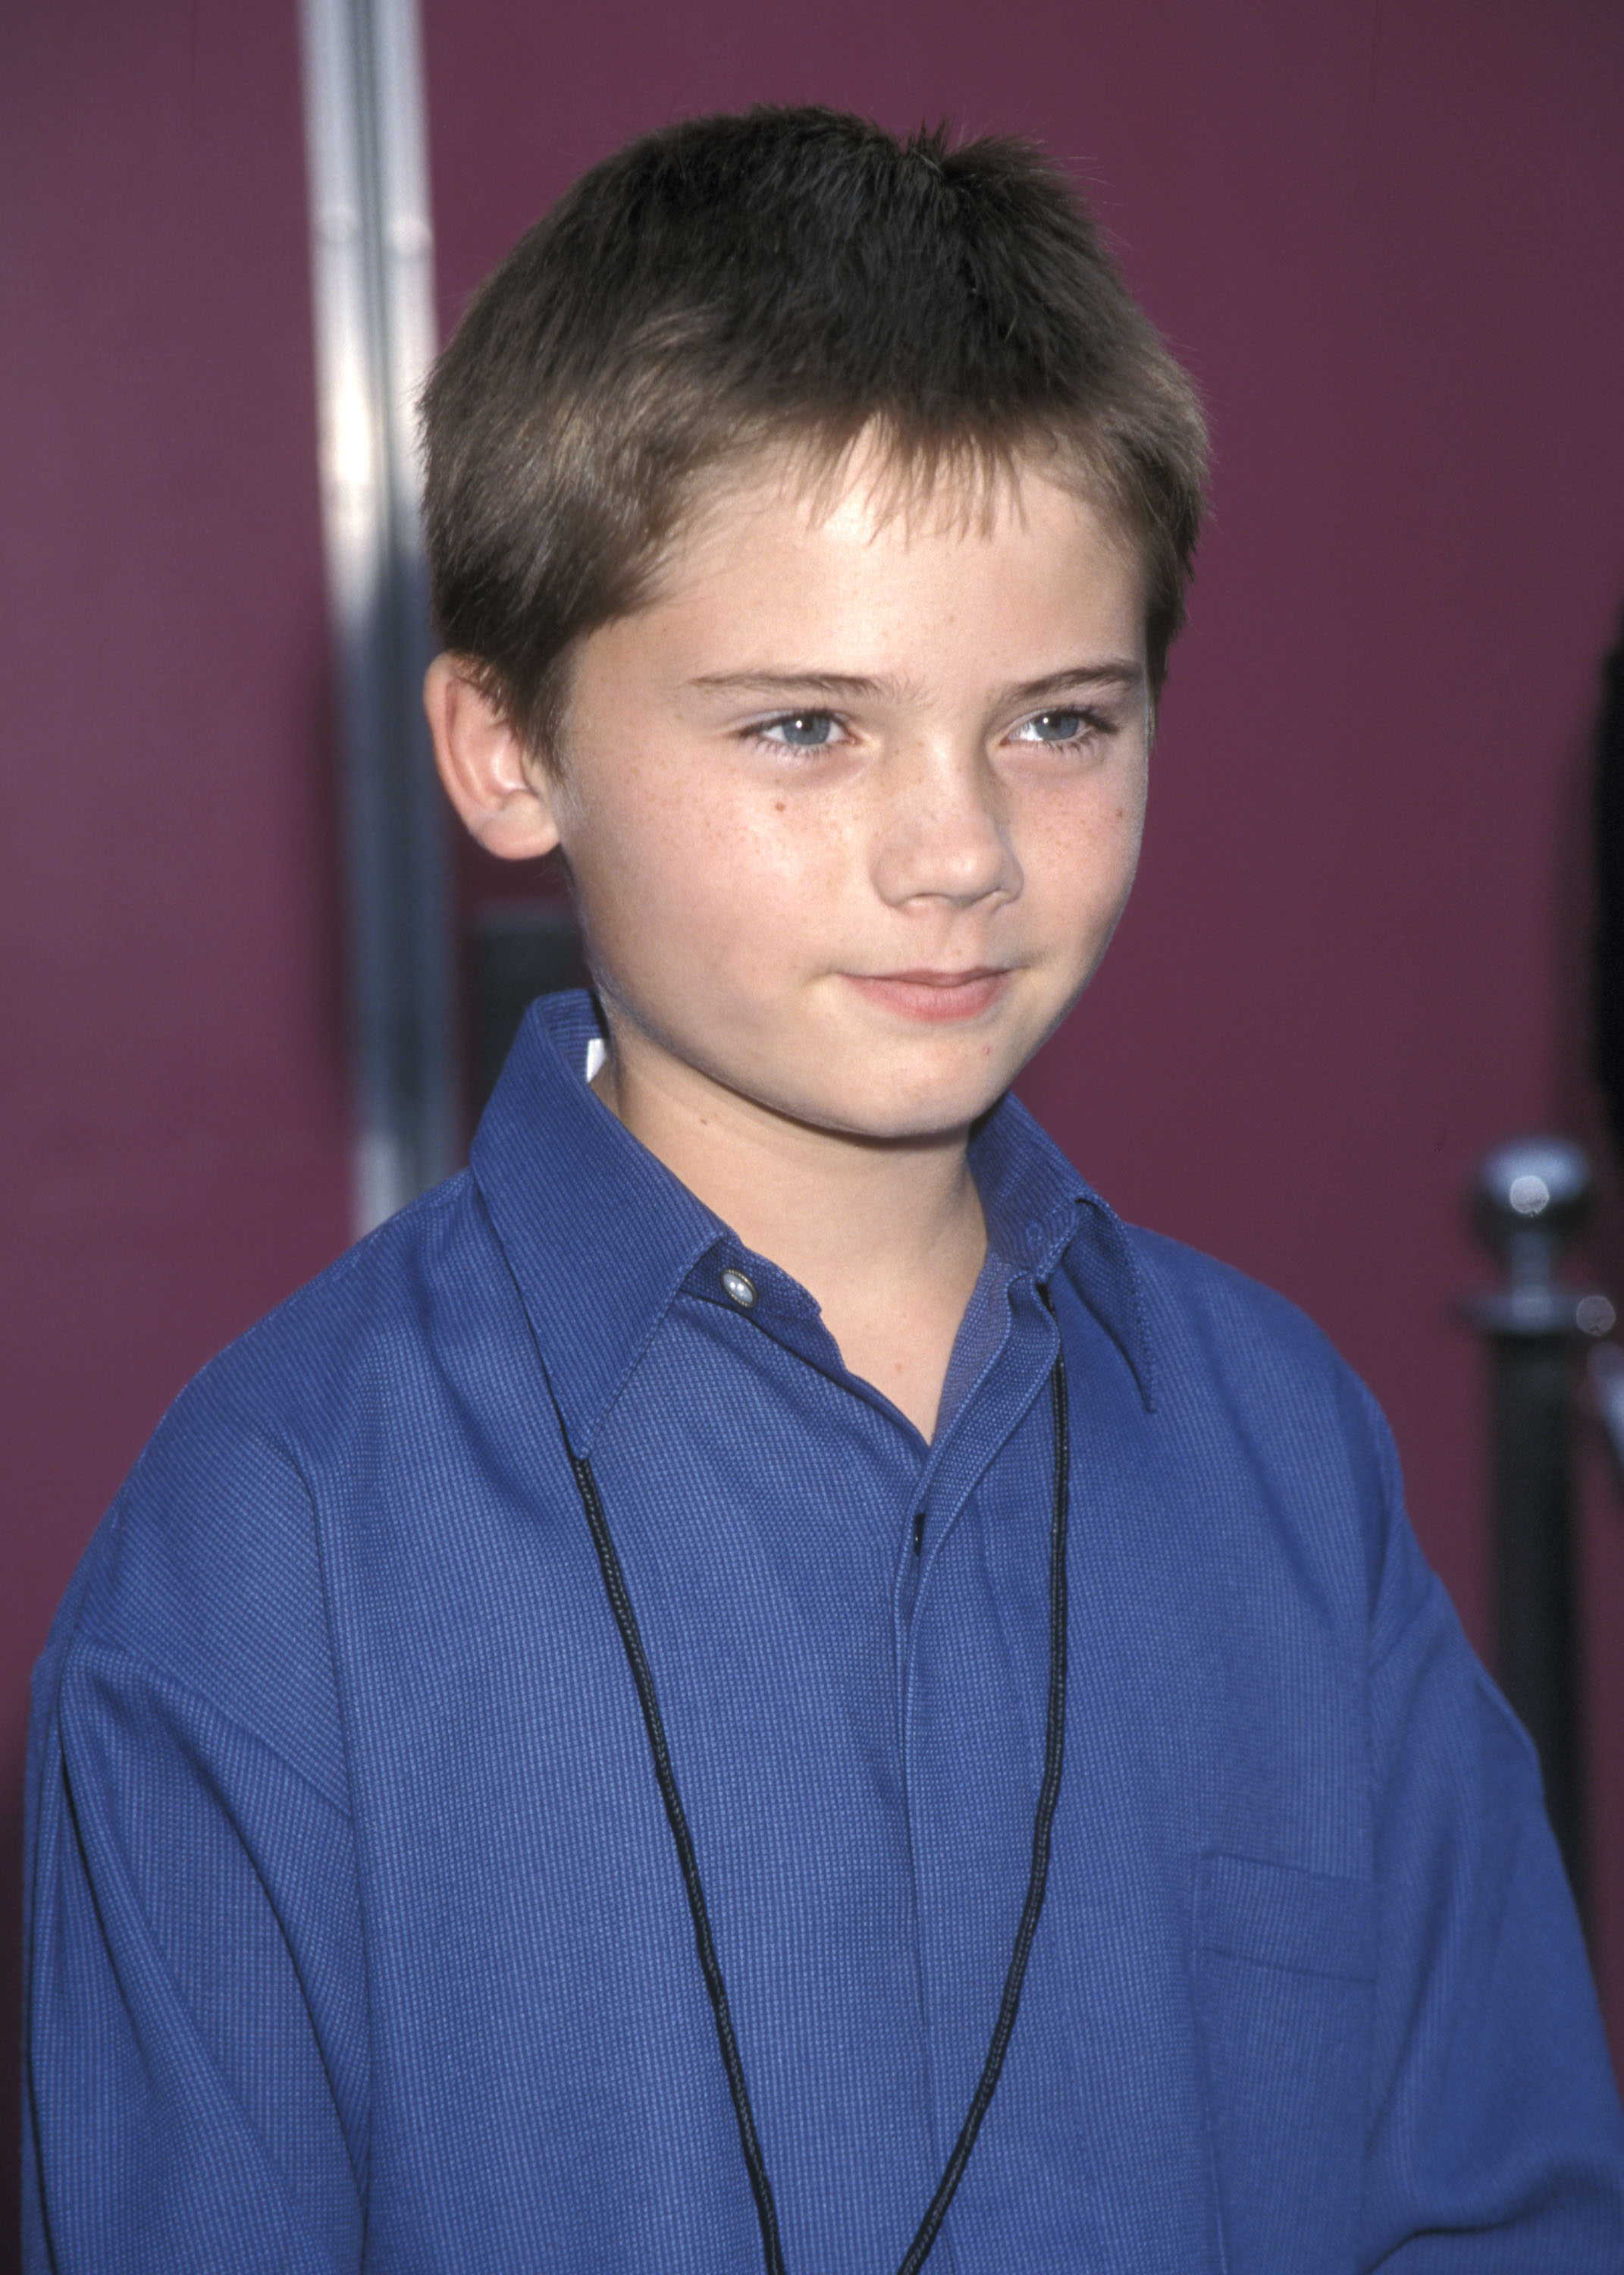 Actor Jake Lloyd on November 7, 1999, in Universal City, California. | Source: Getty Images